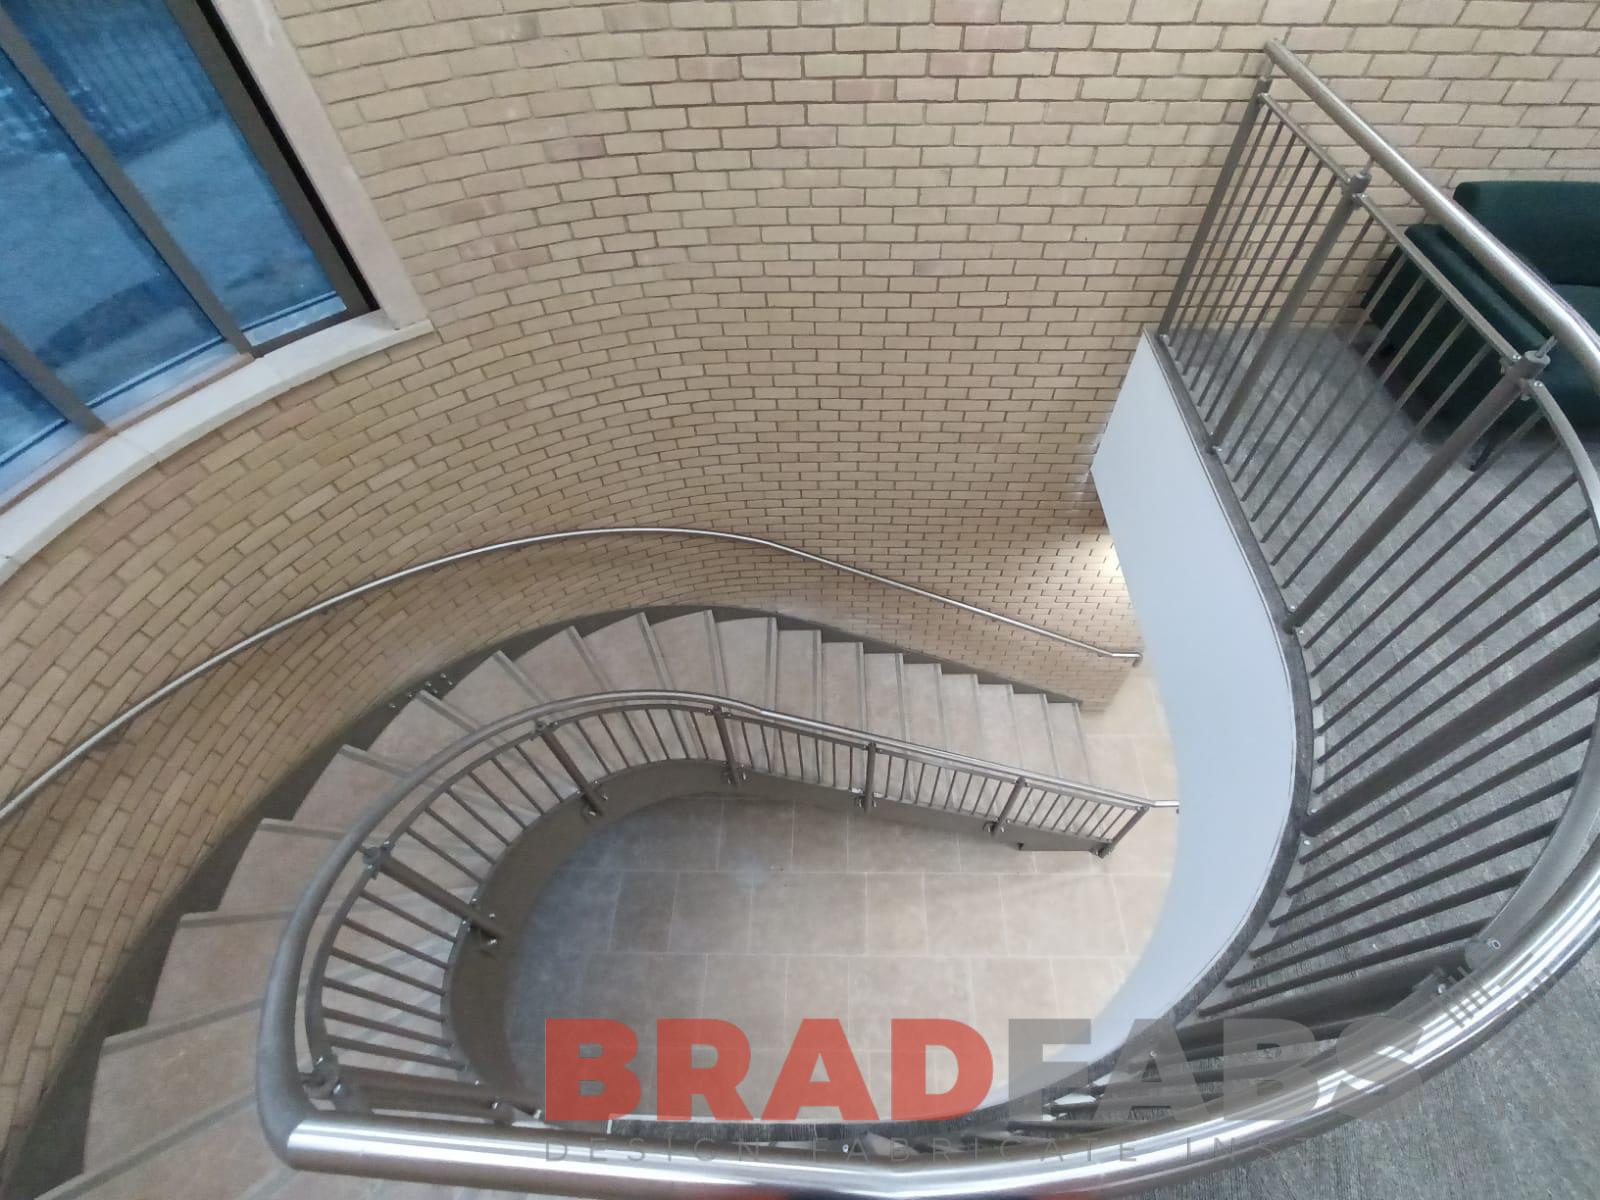 Helix staircase by bradfabs with vertical bar balustrade